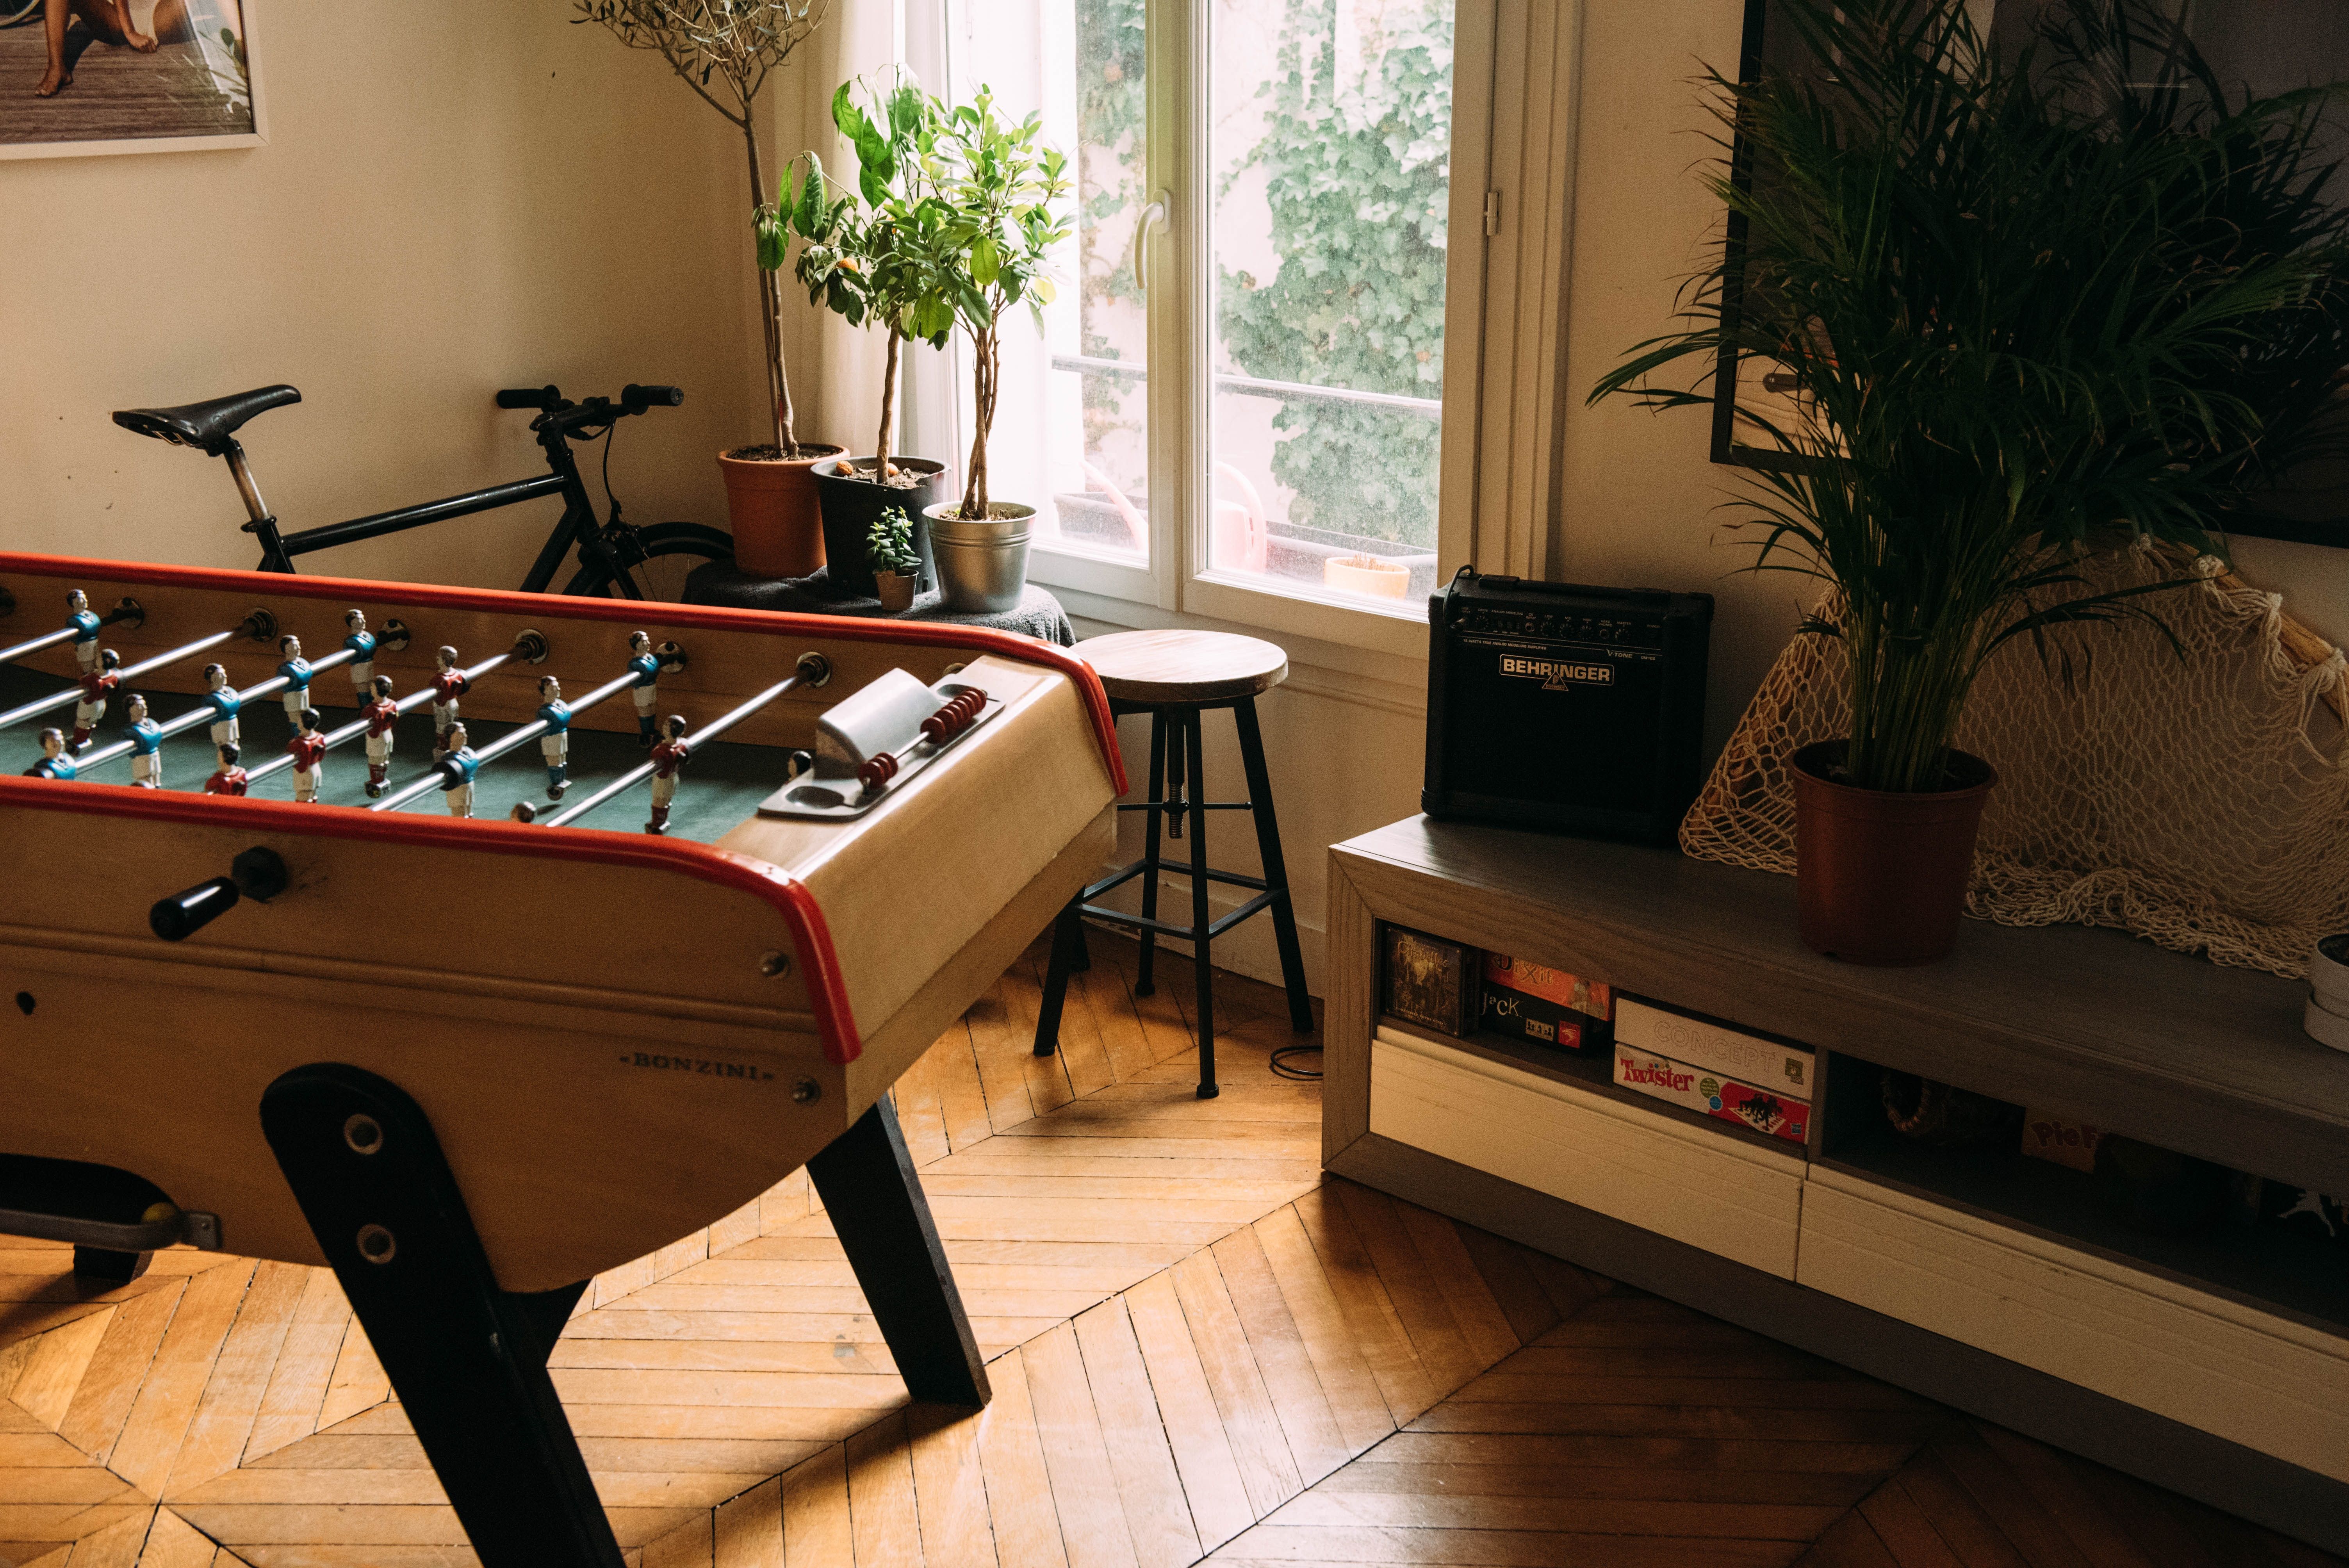 games room with table football and board games